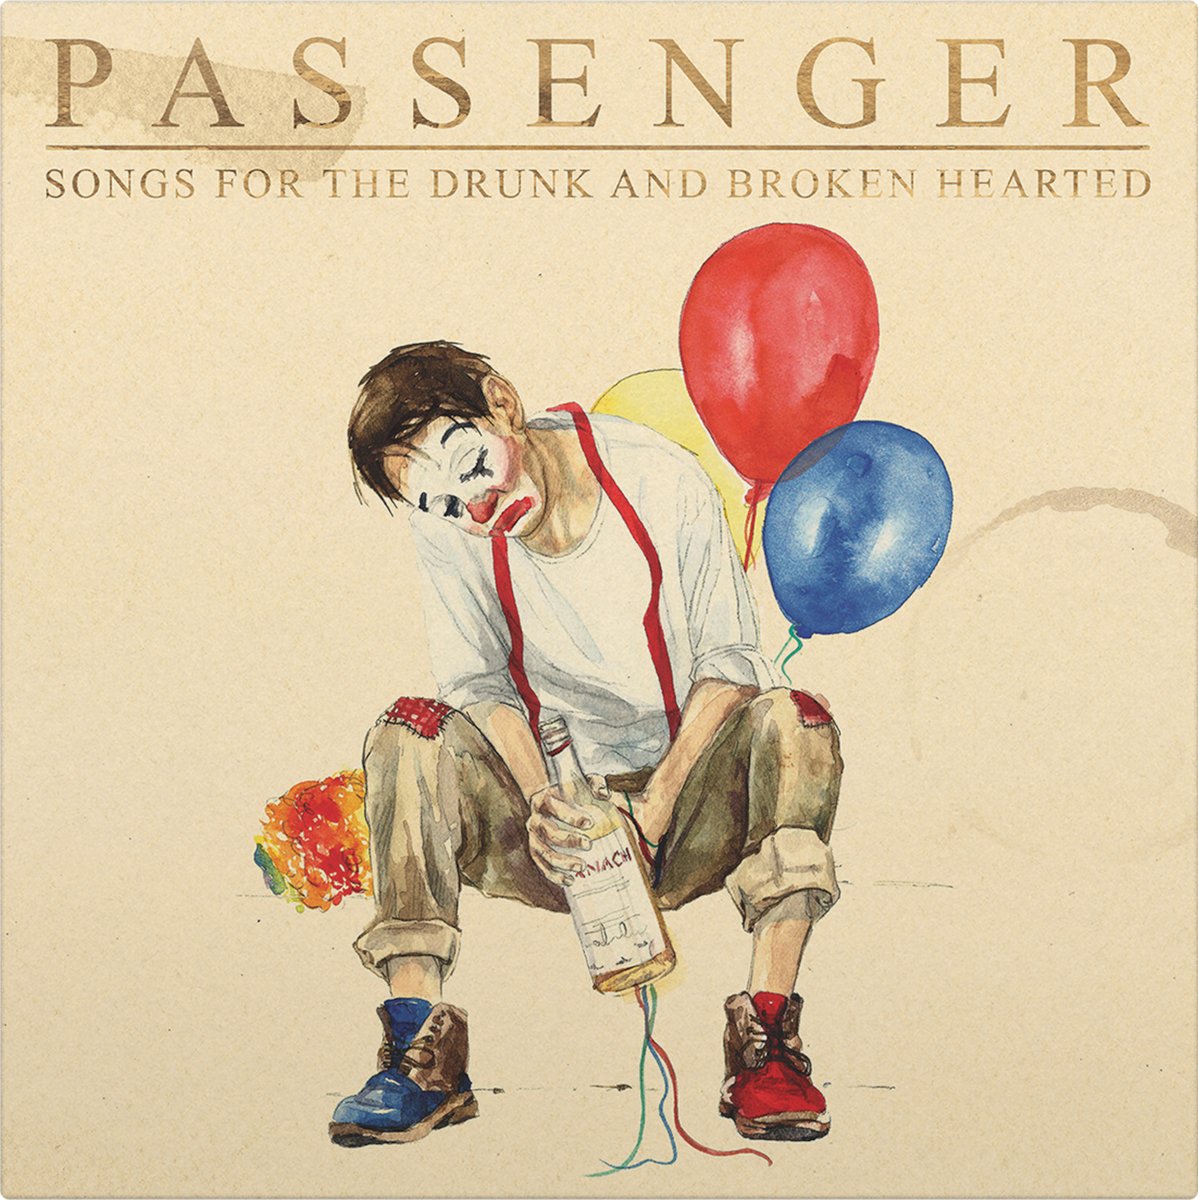 Passenger Songs for the Drunk and Broken Hearted